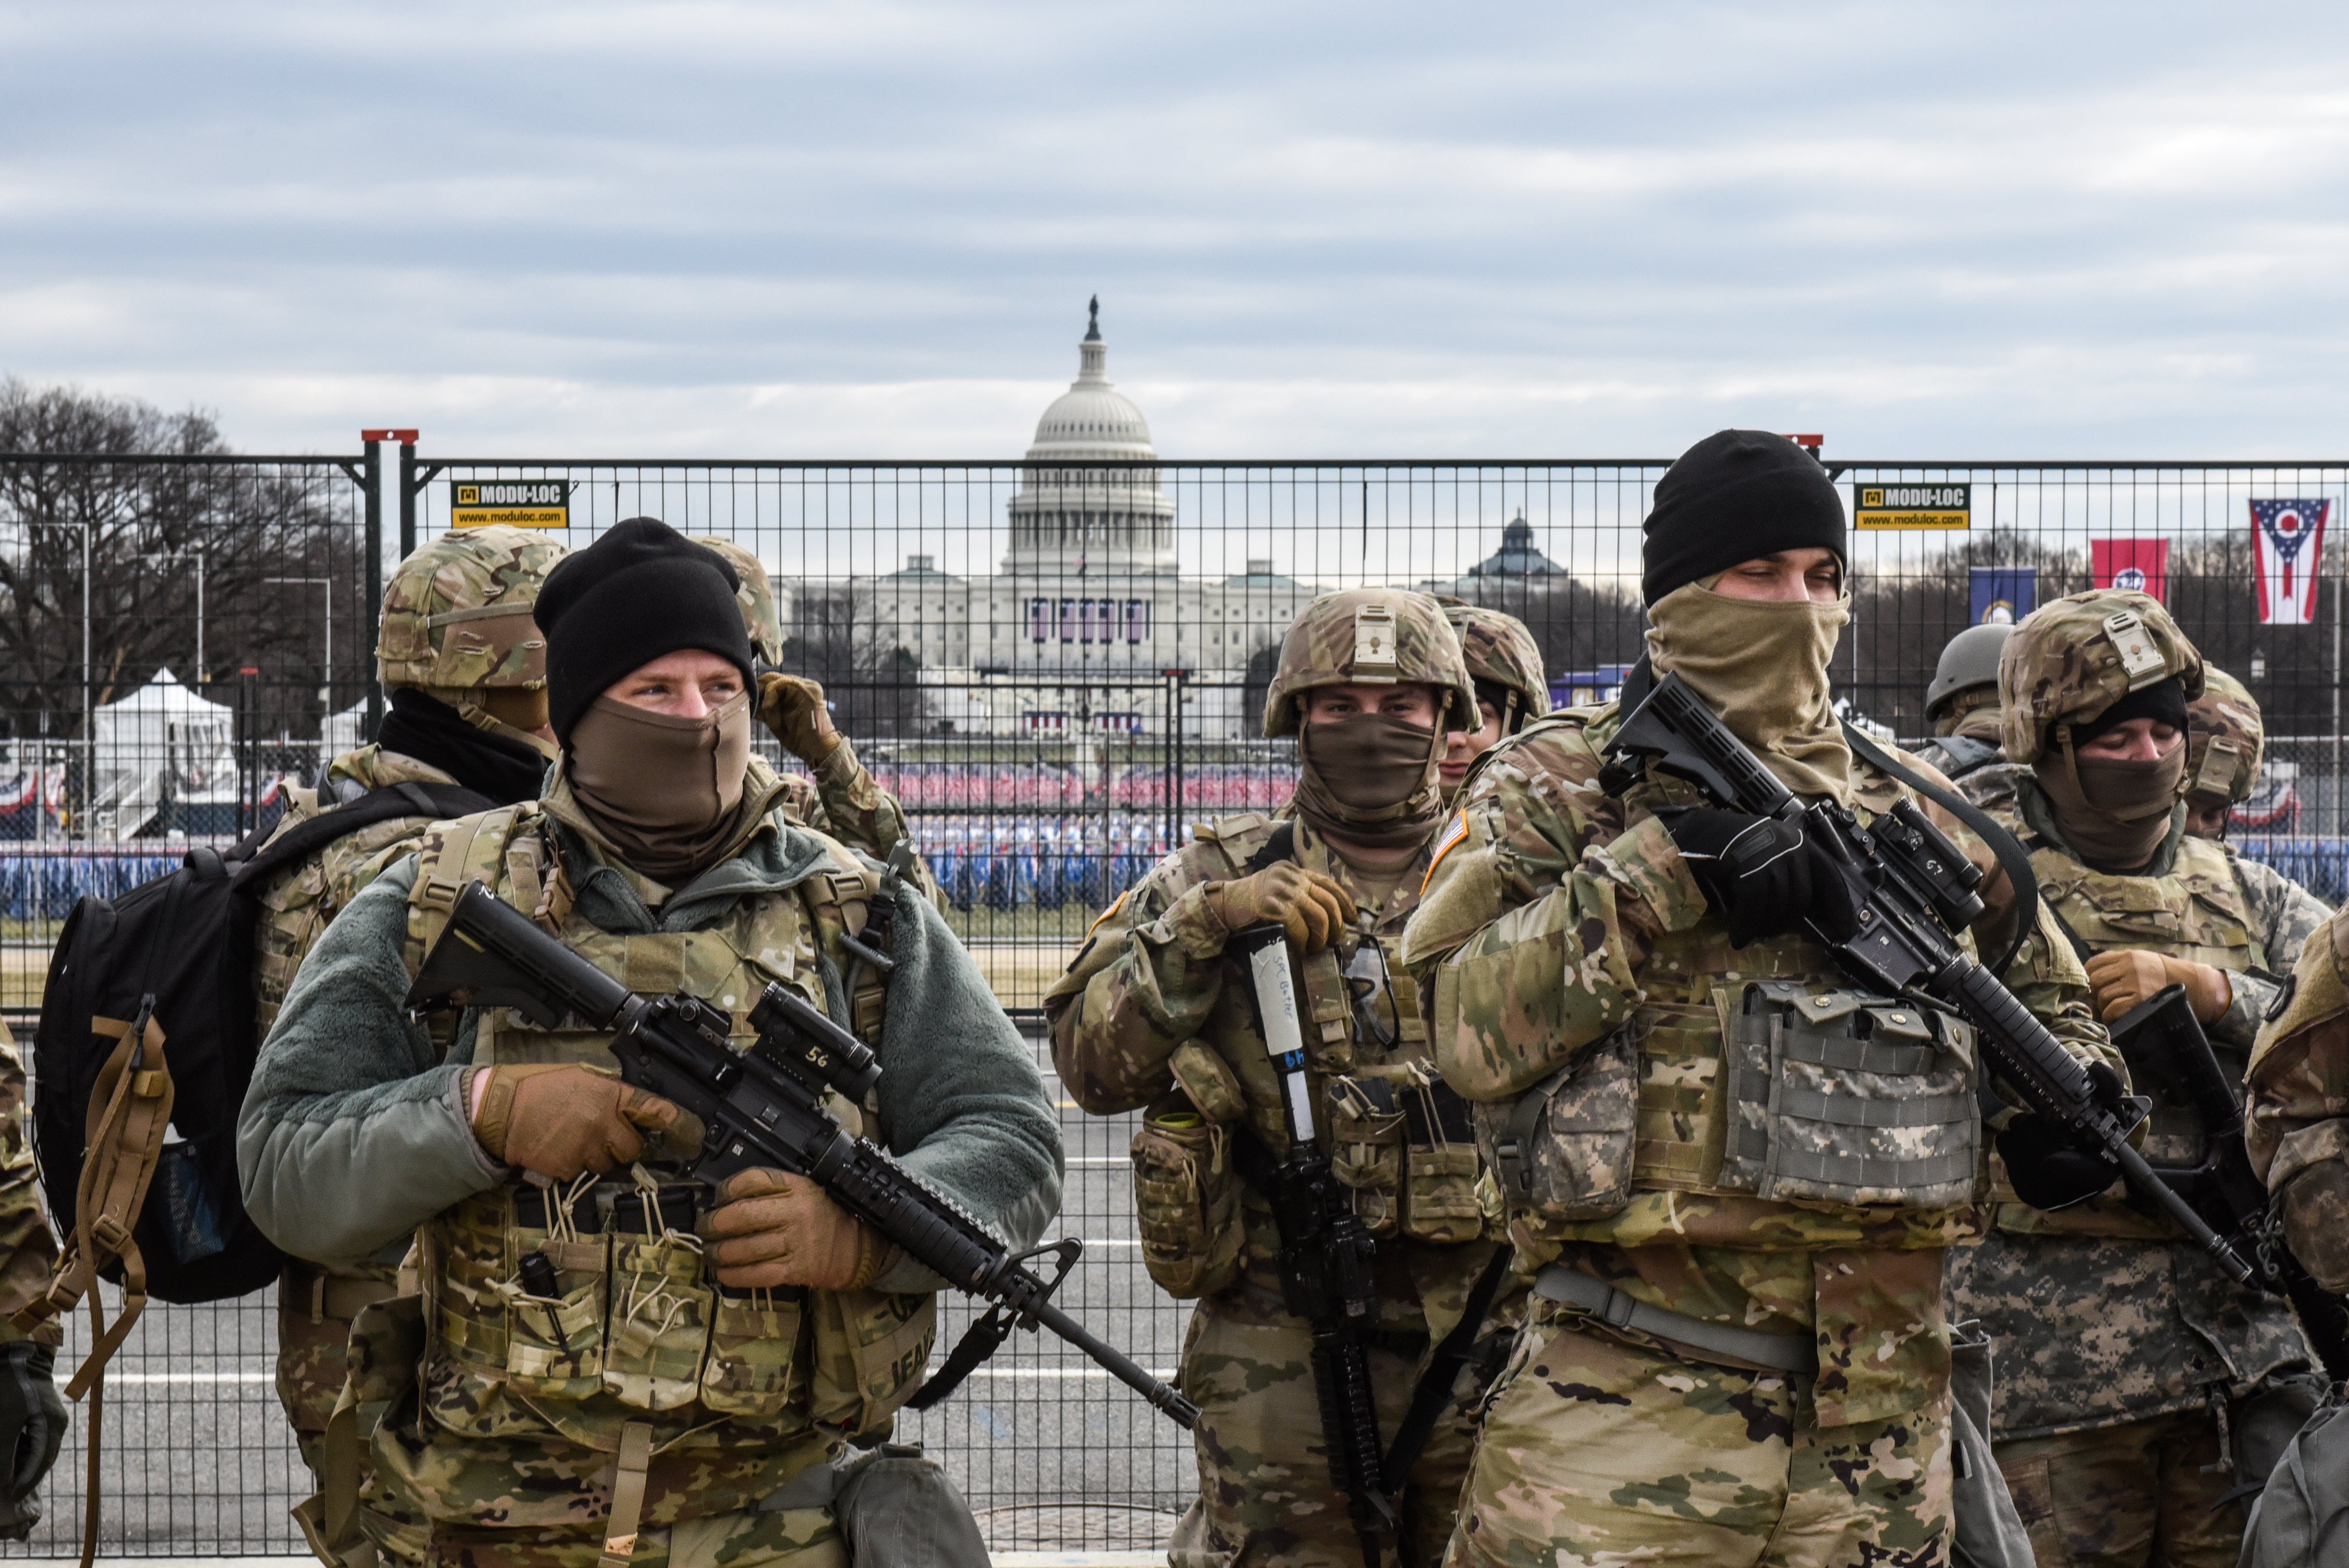 Heavily armed members of the National Guard are keeping watch over the US presidential inauguration this week.